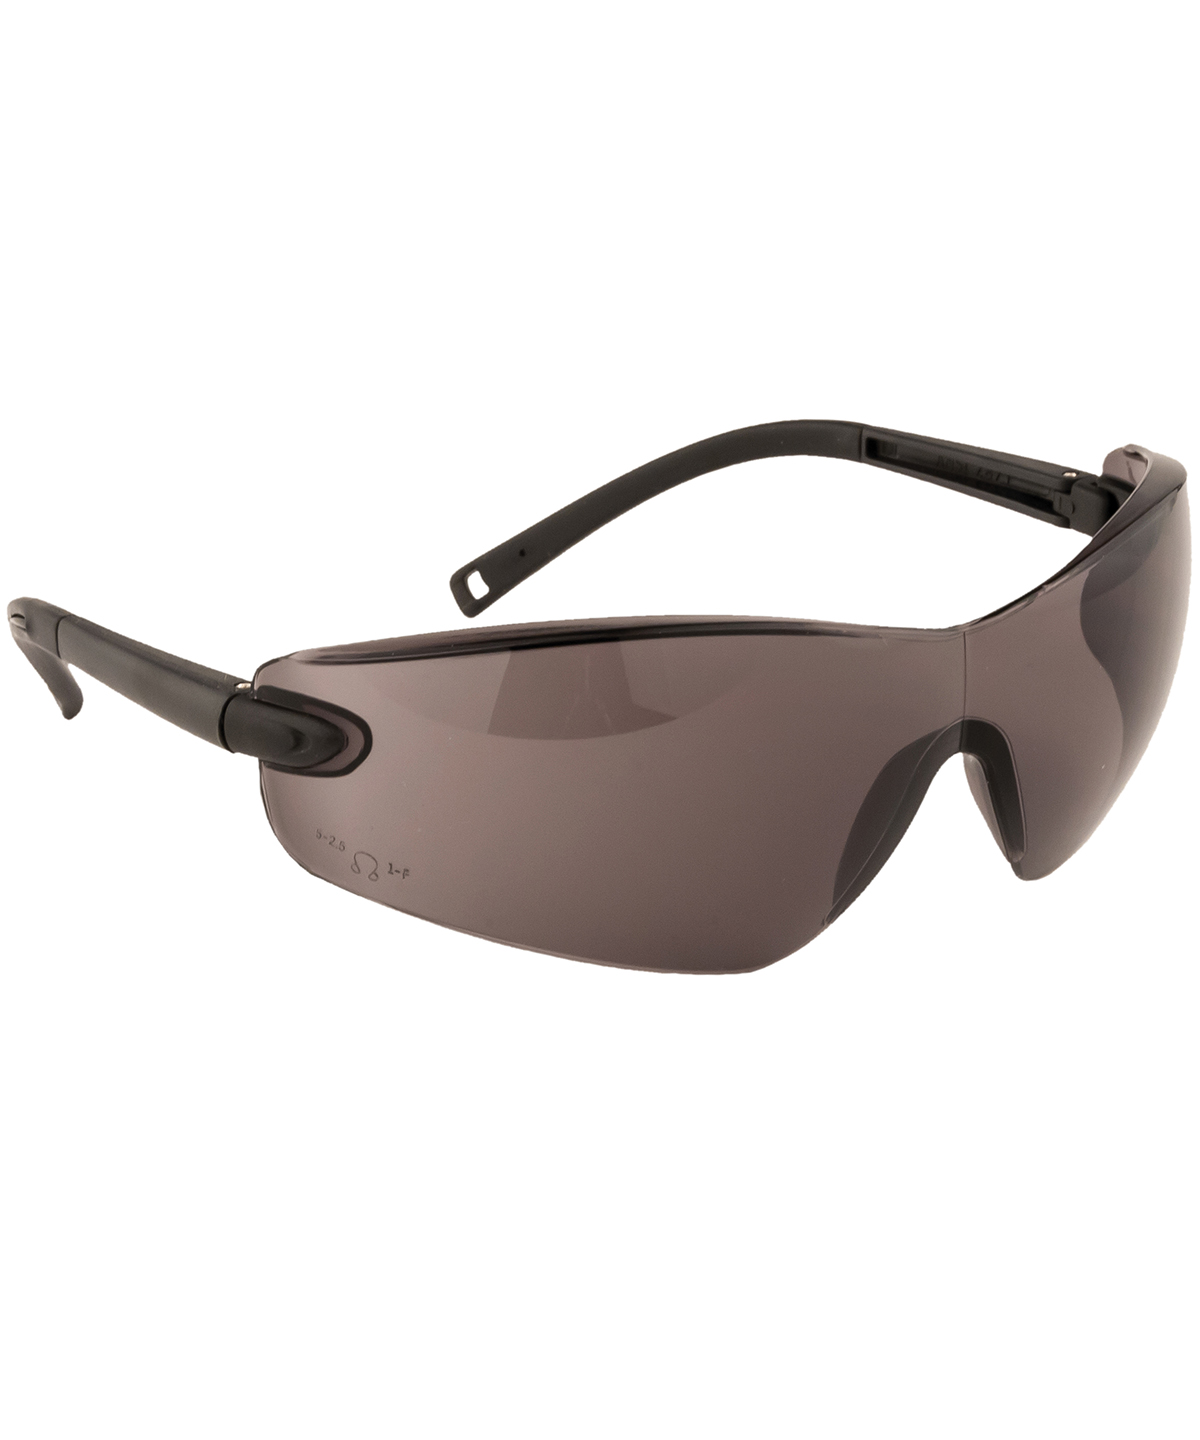 Profile Safety Spectacle (Pw34) Smoke Size One Size